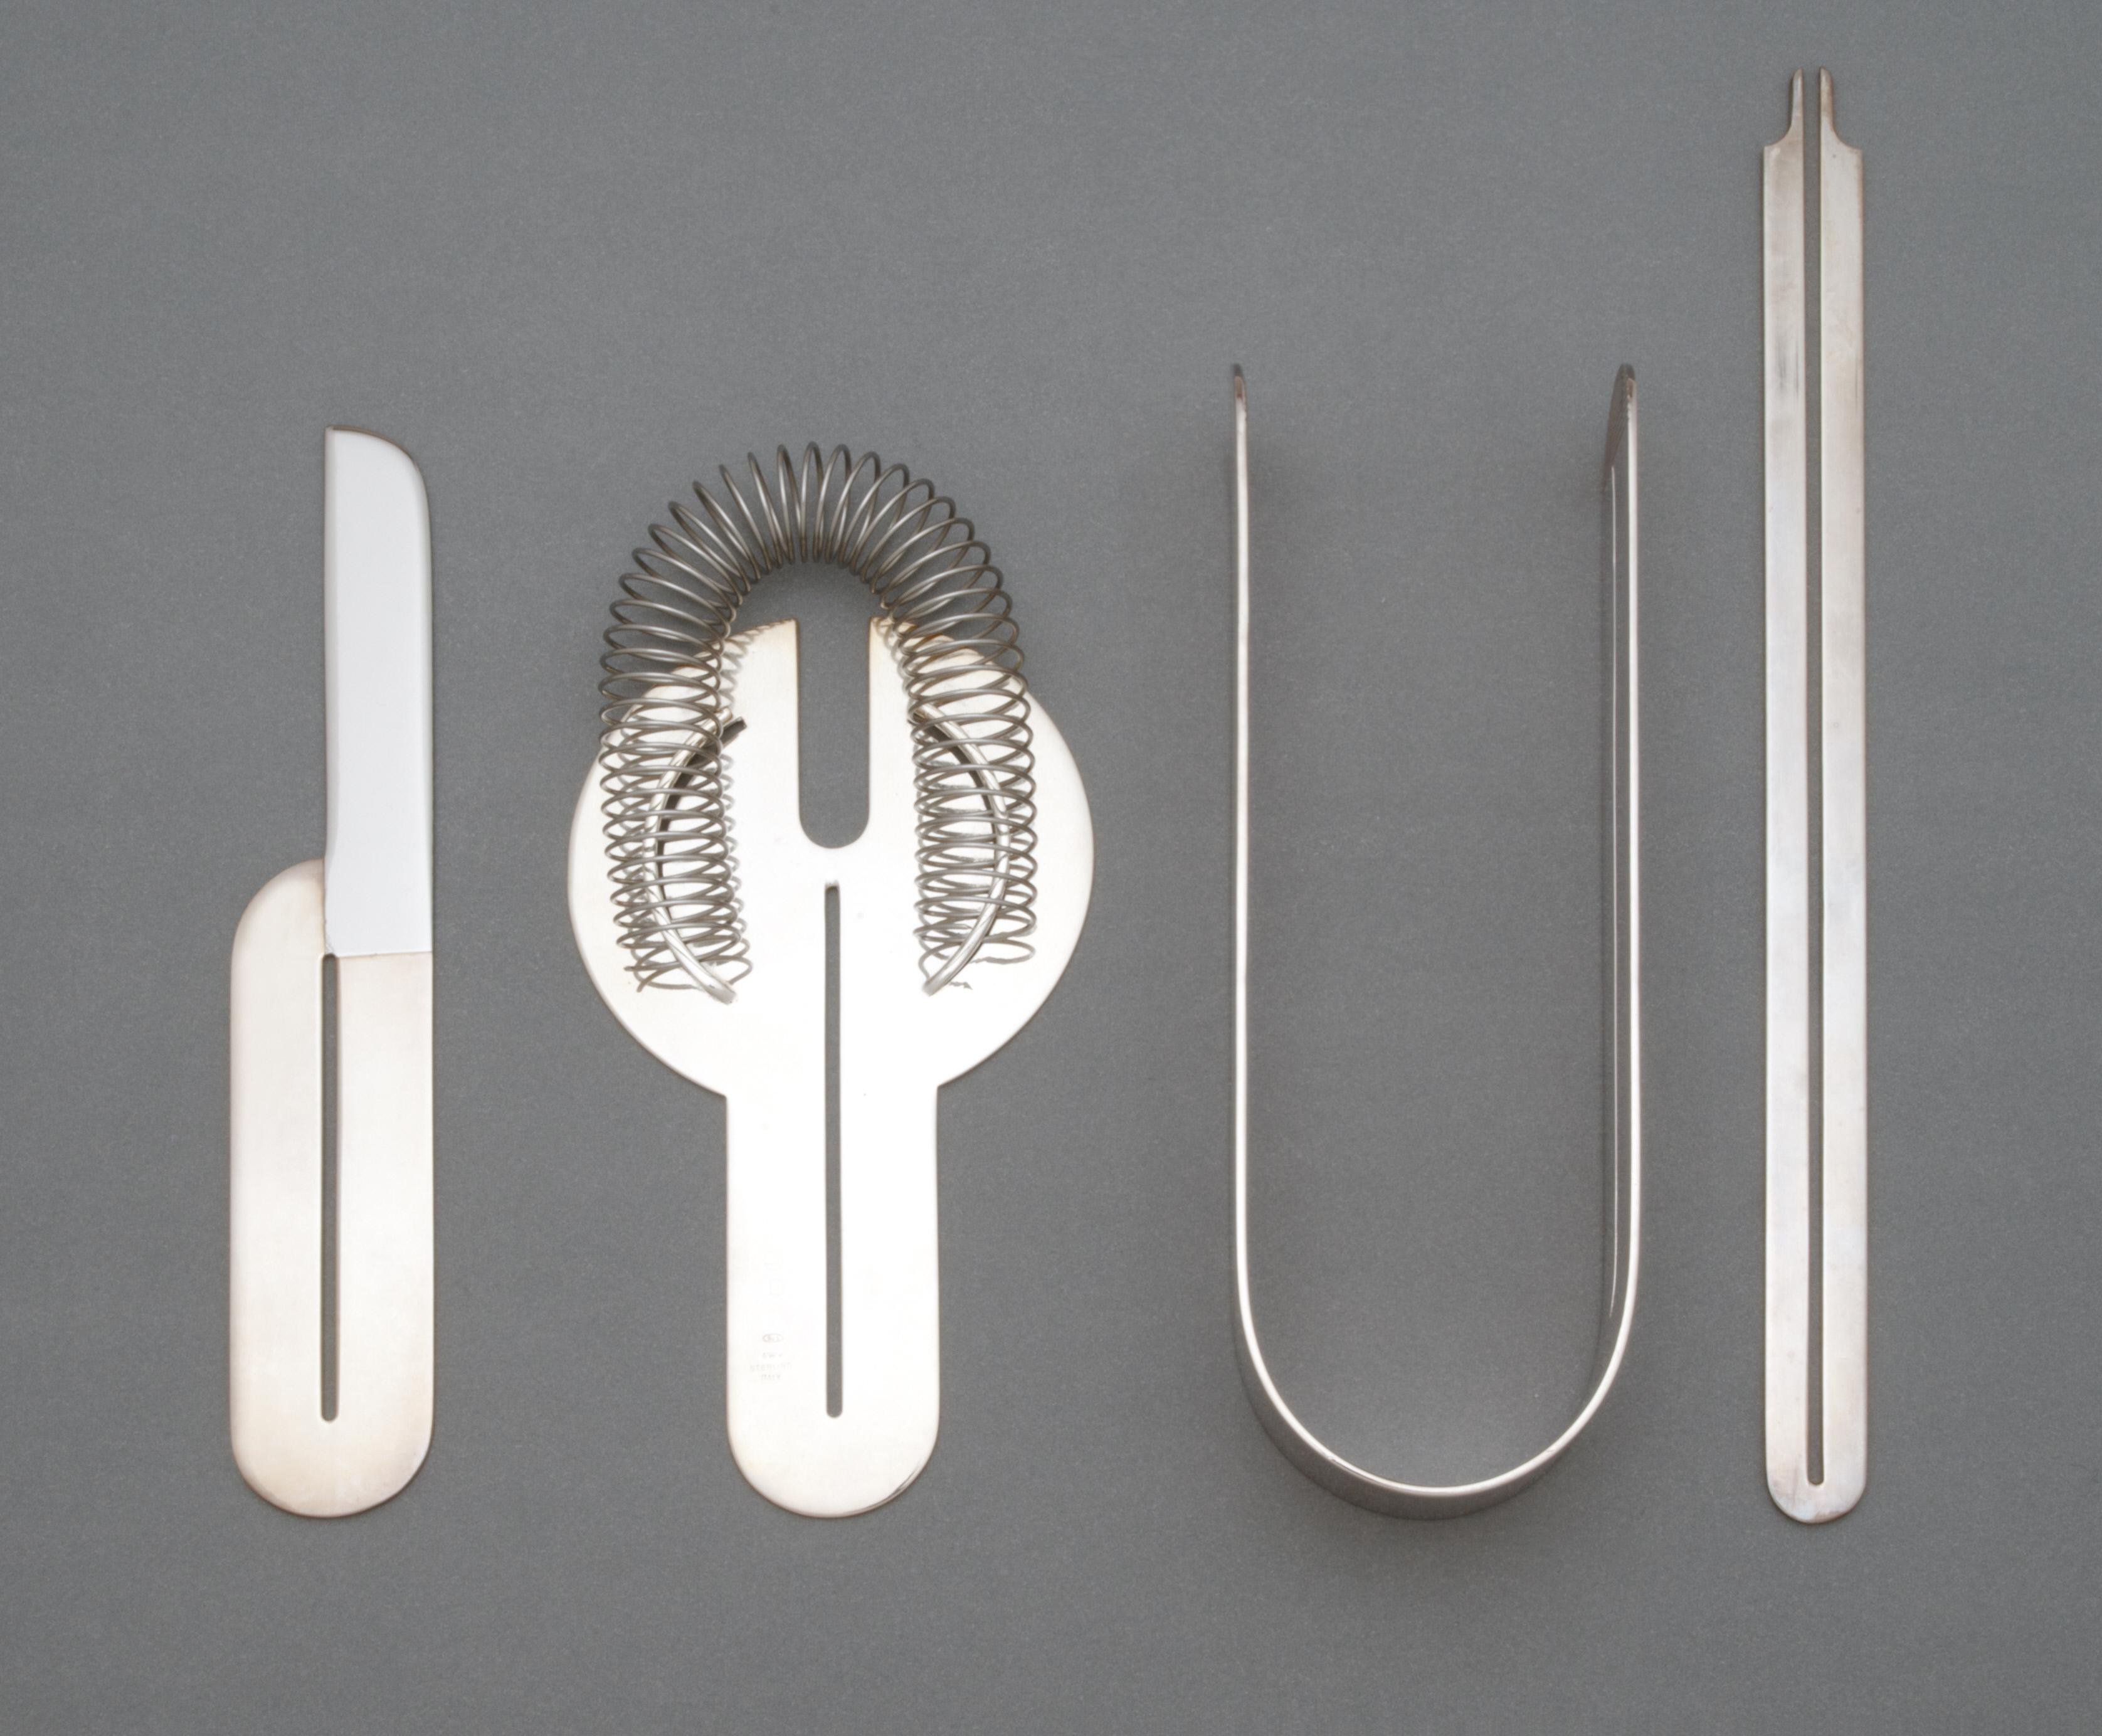 Bar Set. Designed by Lella Vignelli and Massimo Vignelli. 1971. Made by San Lorenzo, Milan, Italy. Medium: Sterling silver